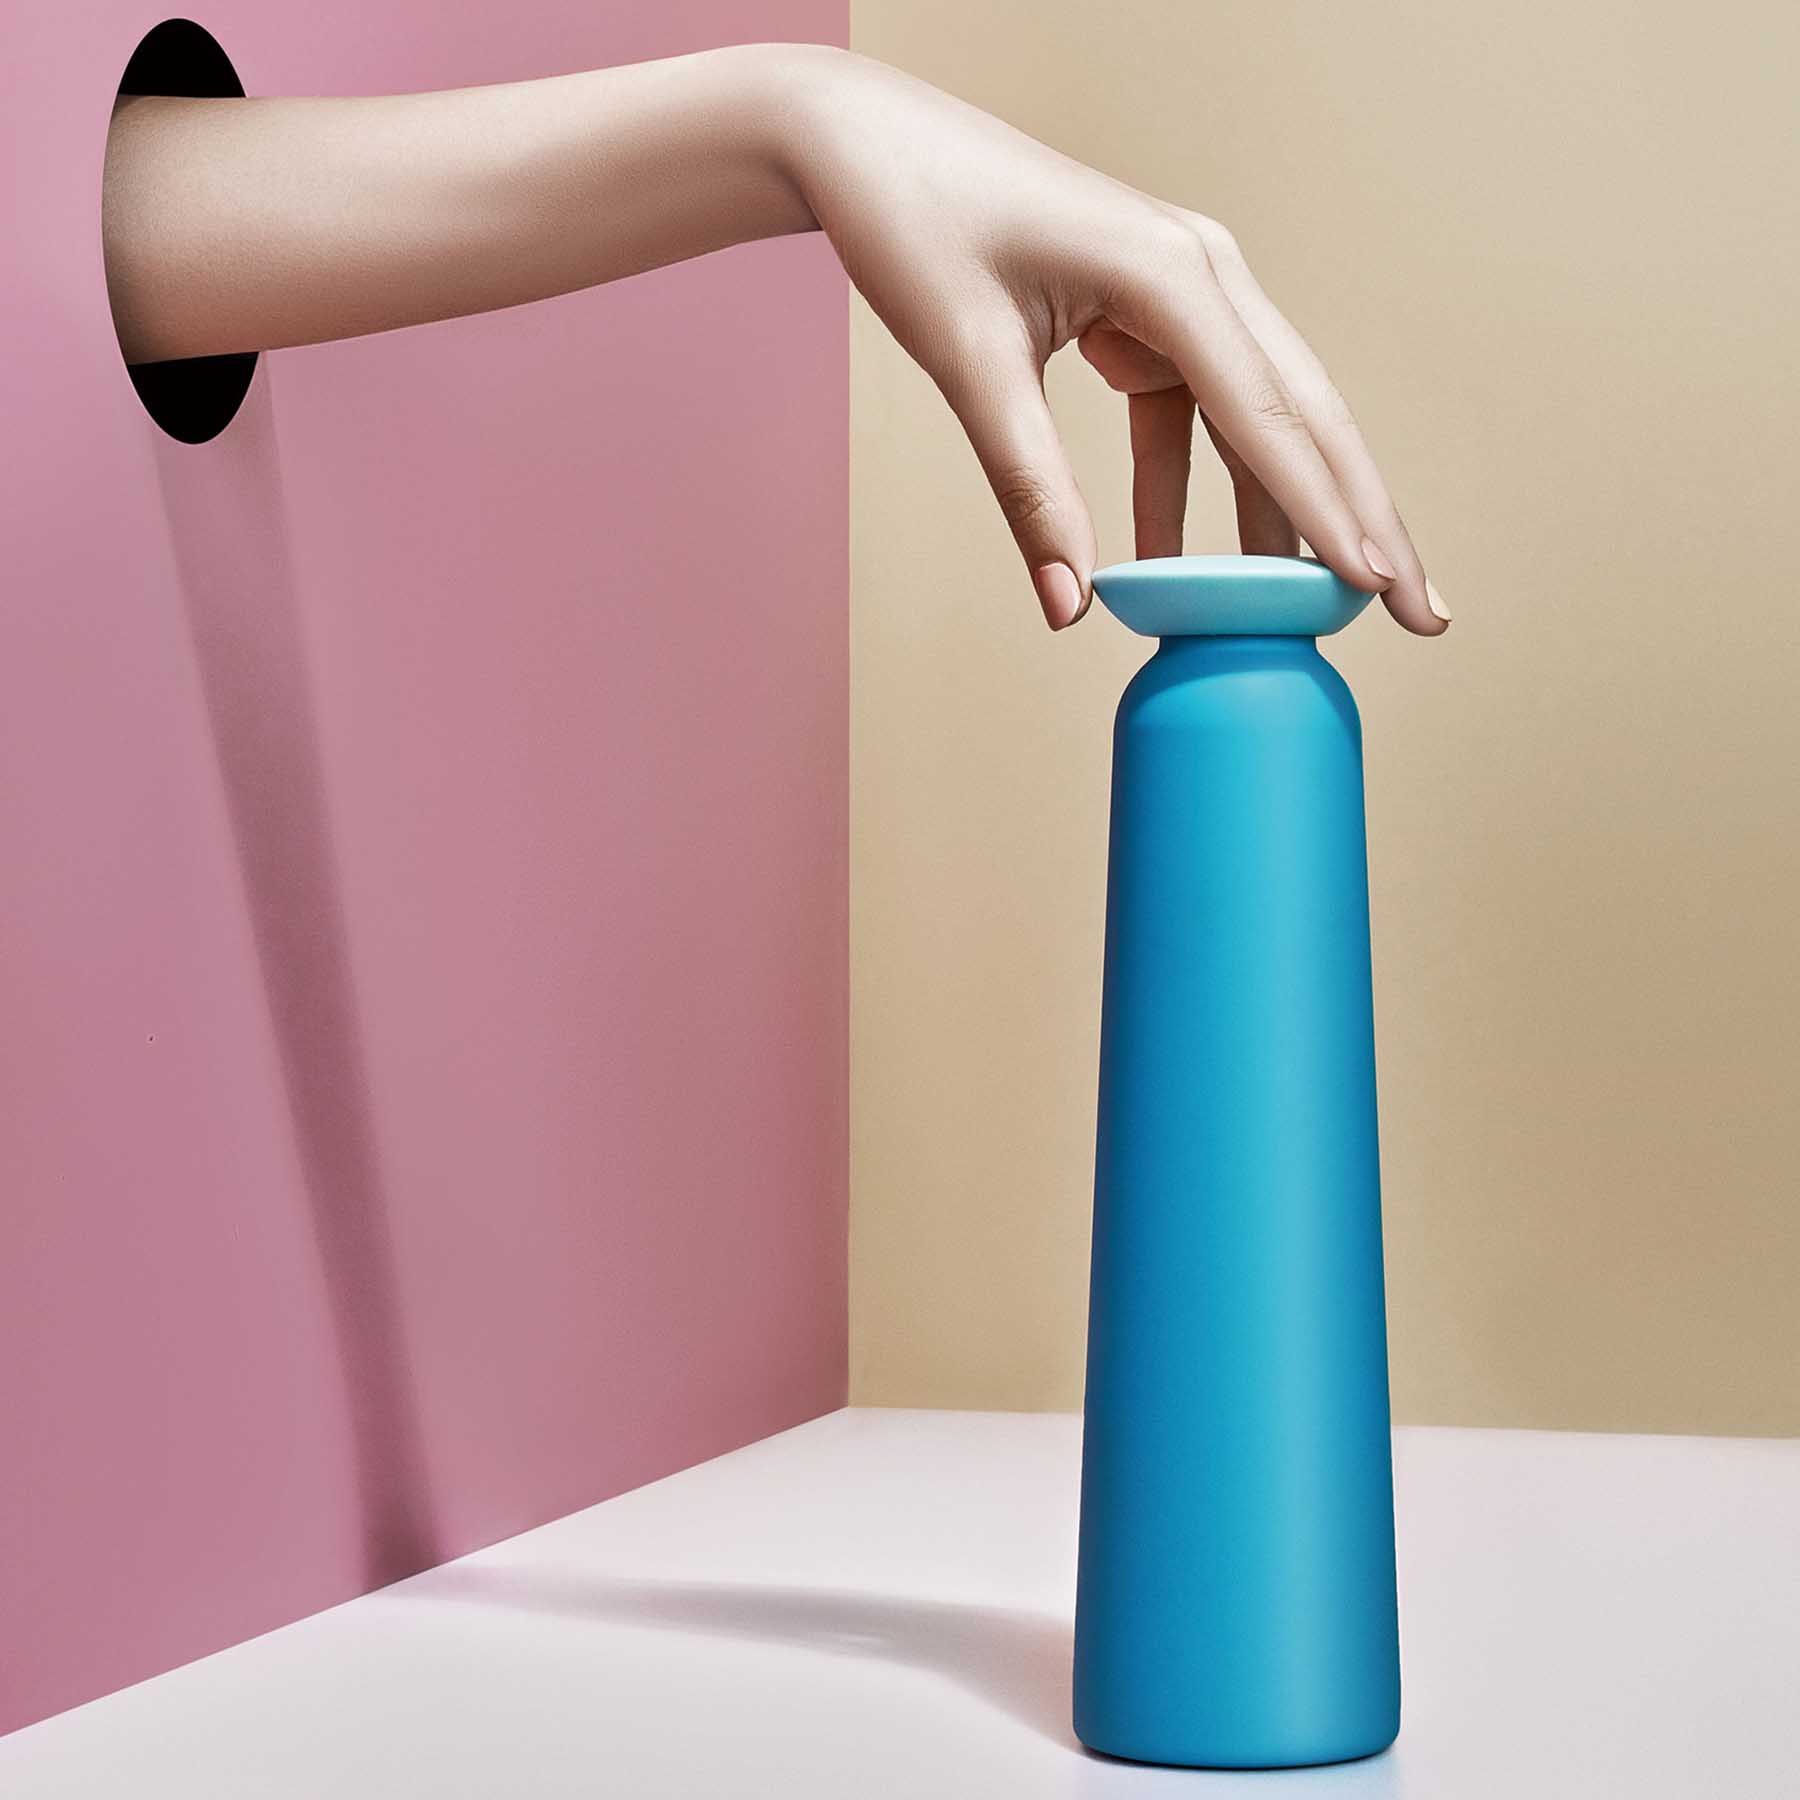 The New Bottle by Nio Life